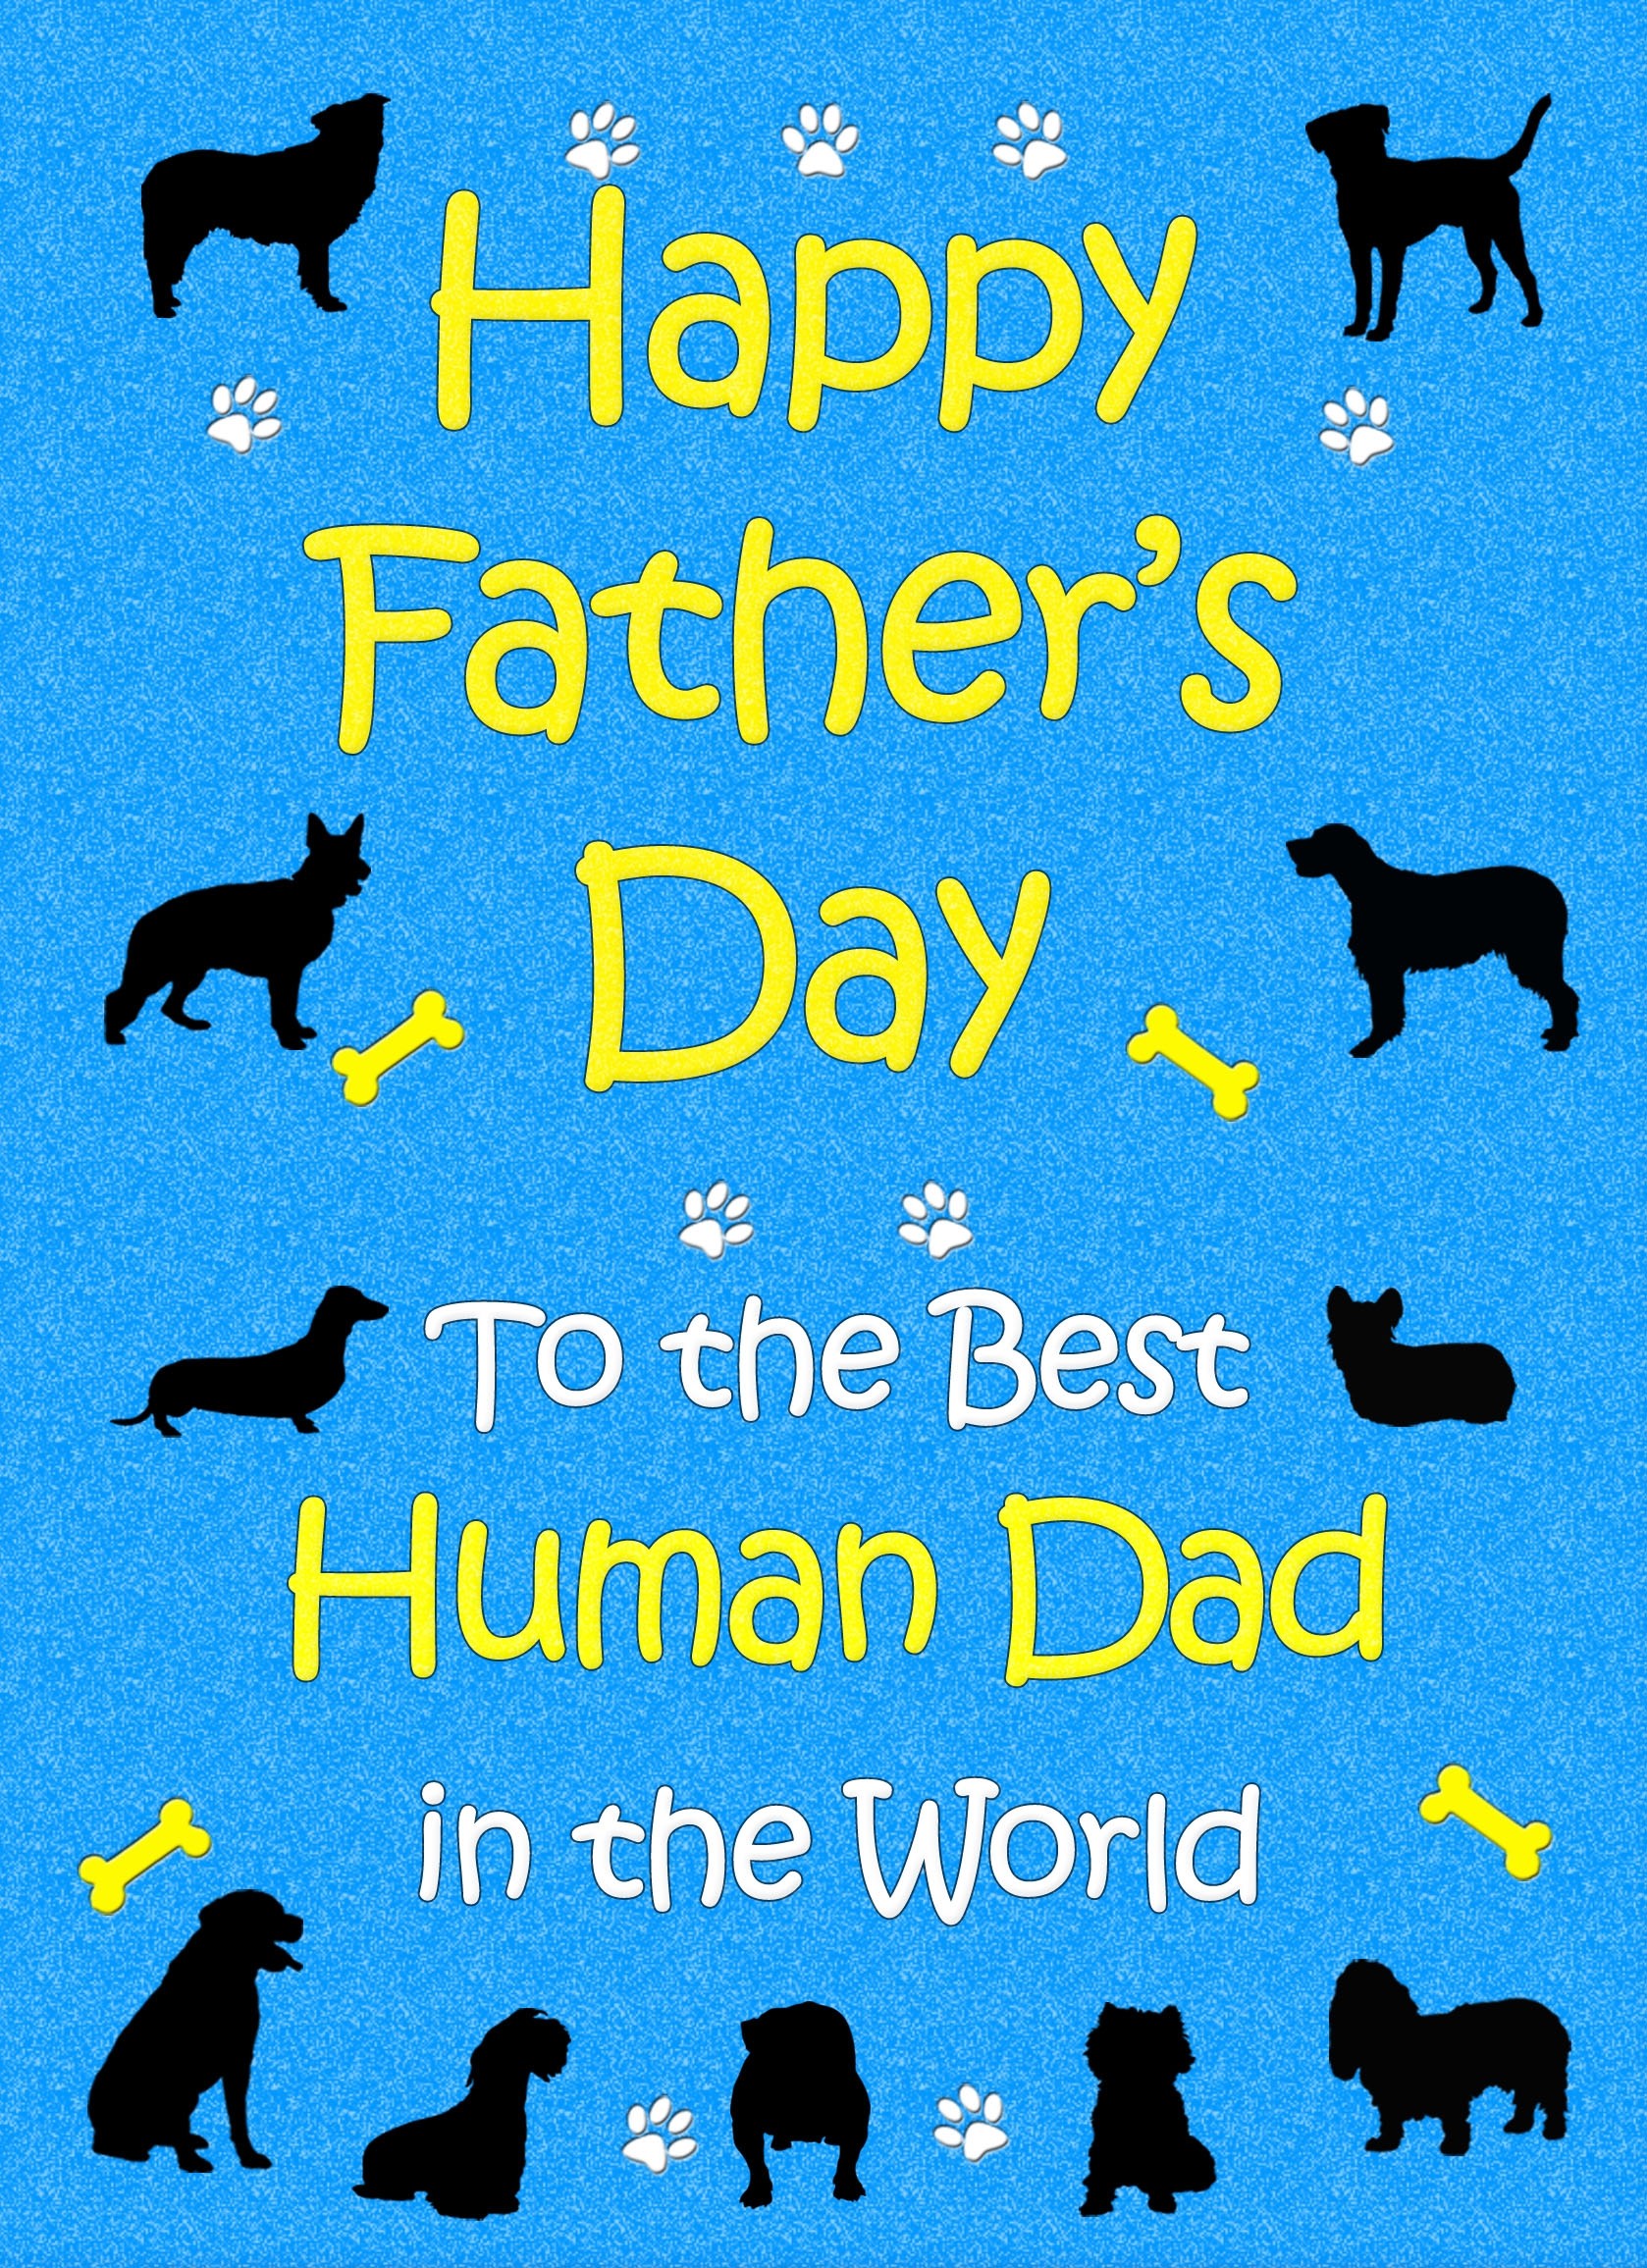 From The Dog Fathers Day Card (Blue, Human Dad)